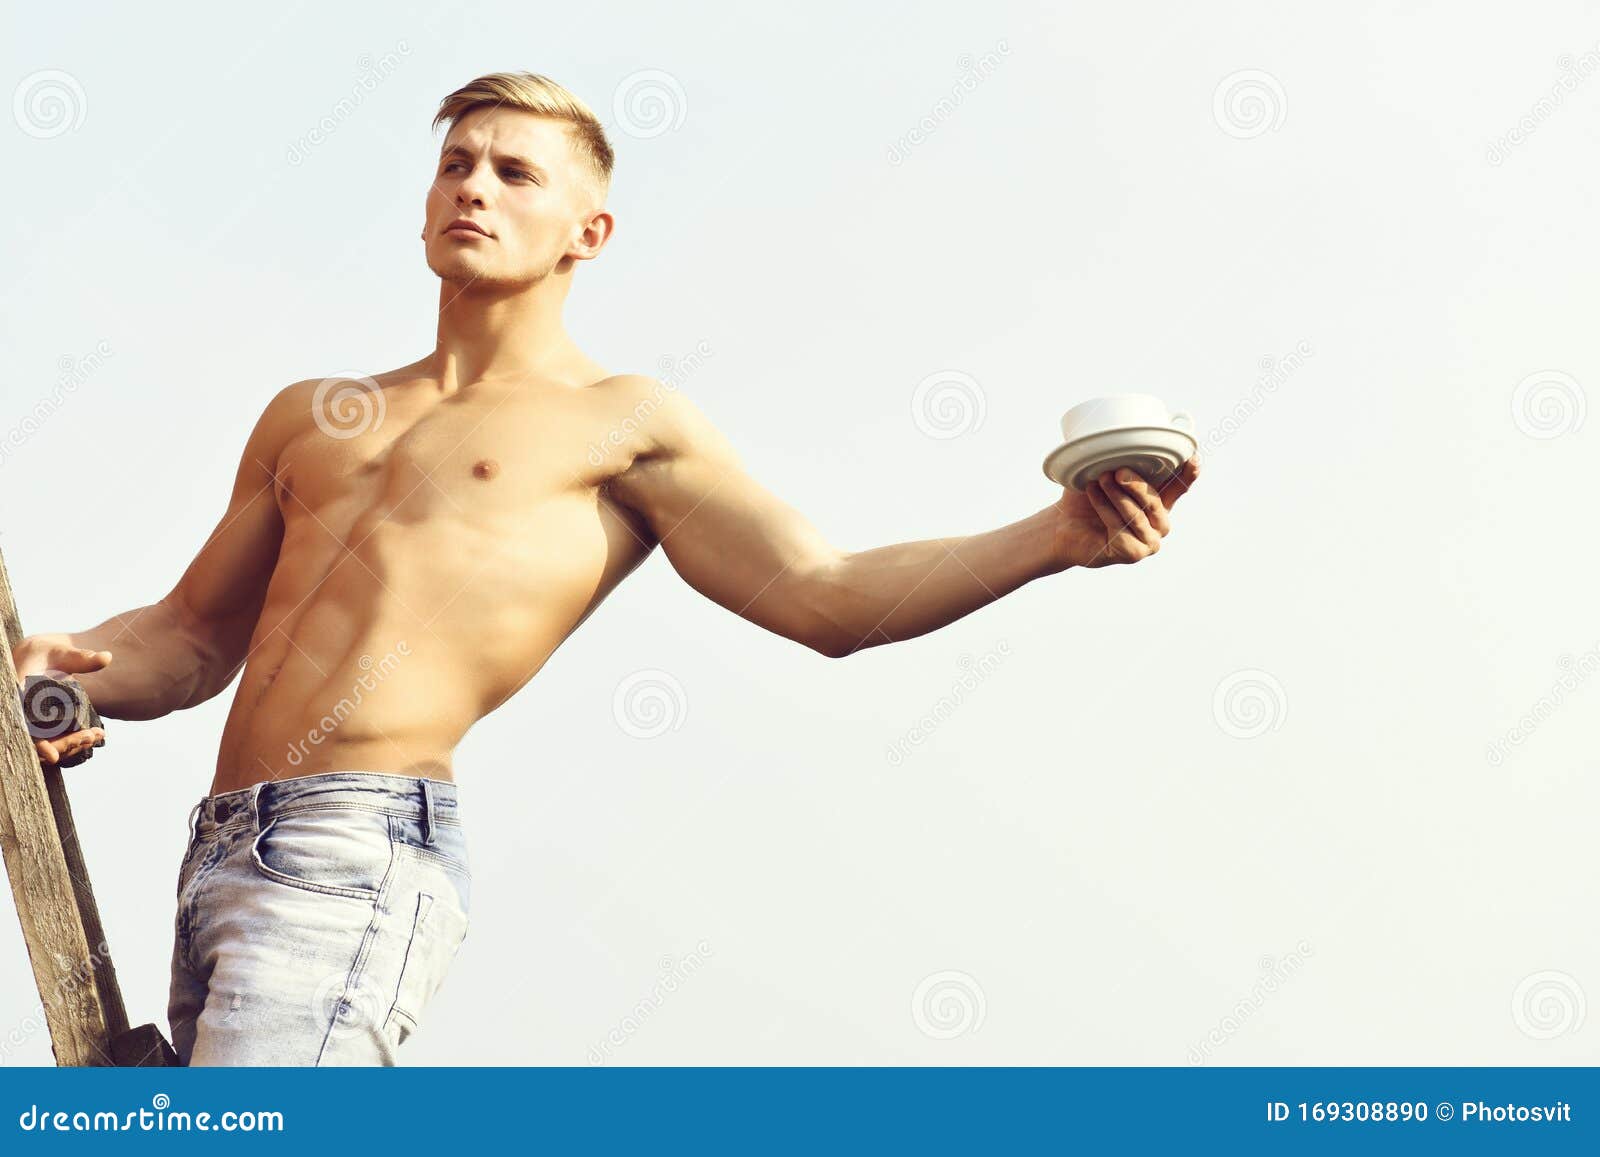 Man Holding Cup Of Coffee On Sky Background, Serious Face Stock Photo ...